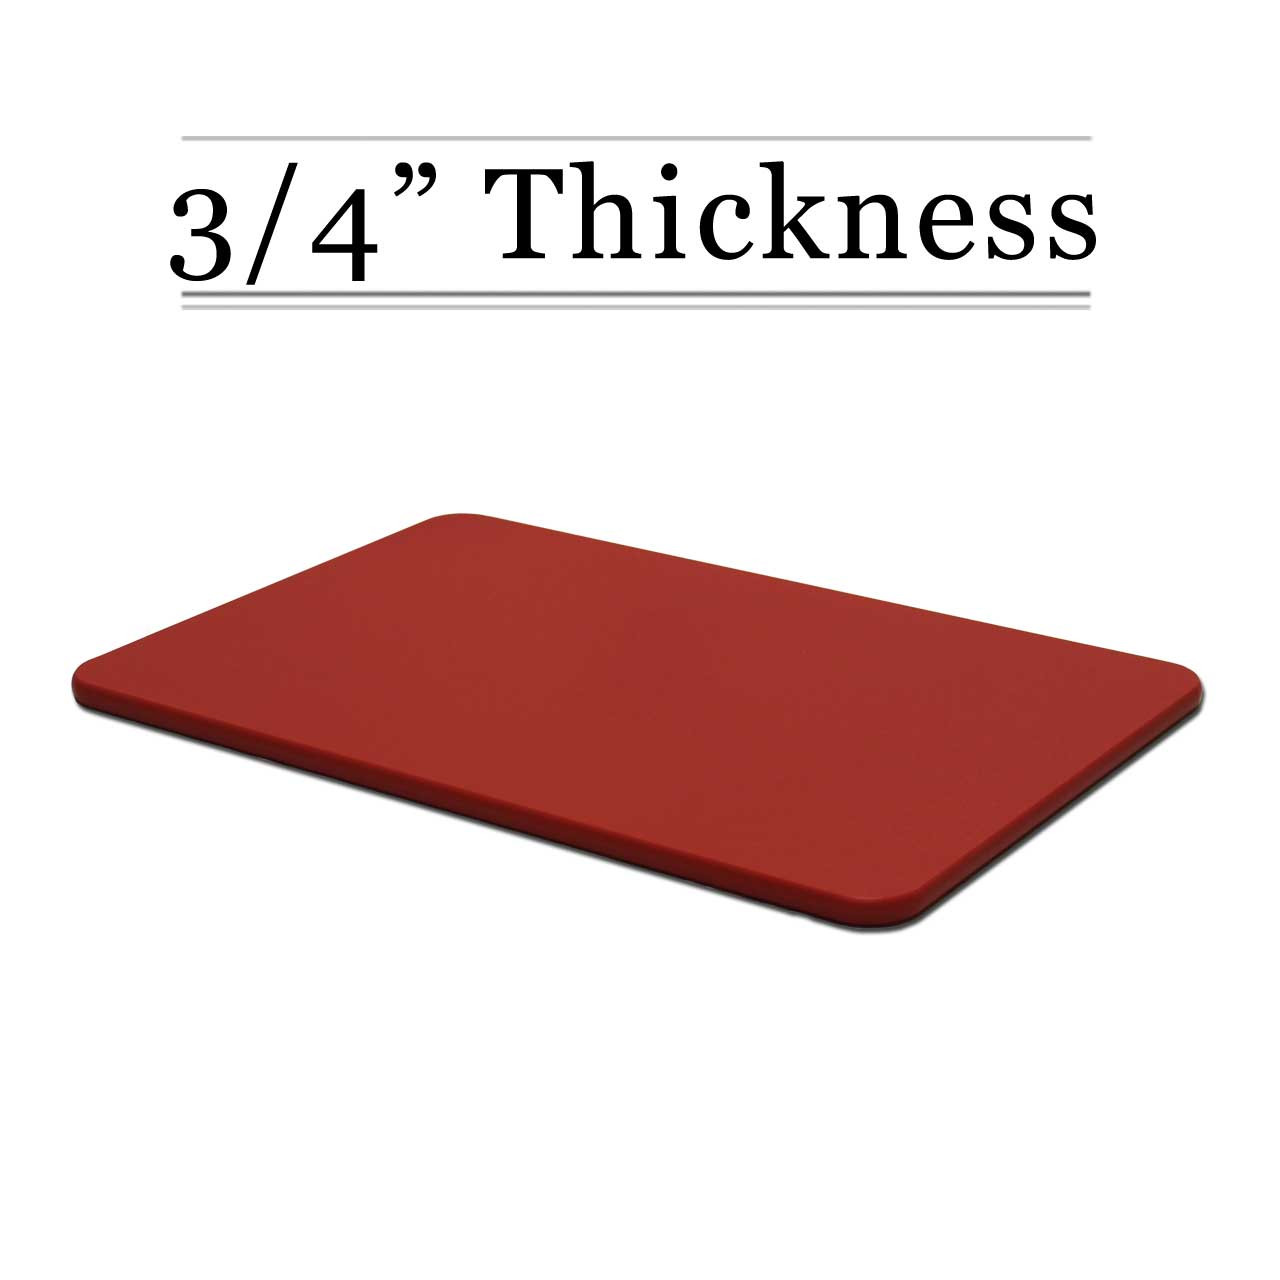 https://cdn1.bigcommerce.com/n-ou1isn/hdsjypr0/products/490/images/622/3_4_Thick_Red_Cutting_Board__42323.1408733567.1280.1280.jpg?c=2